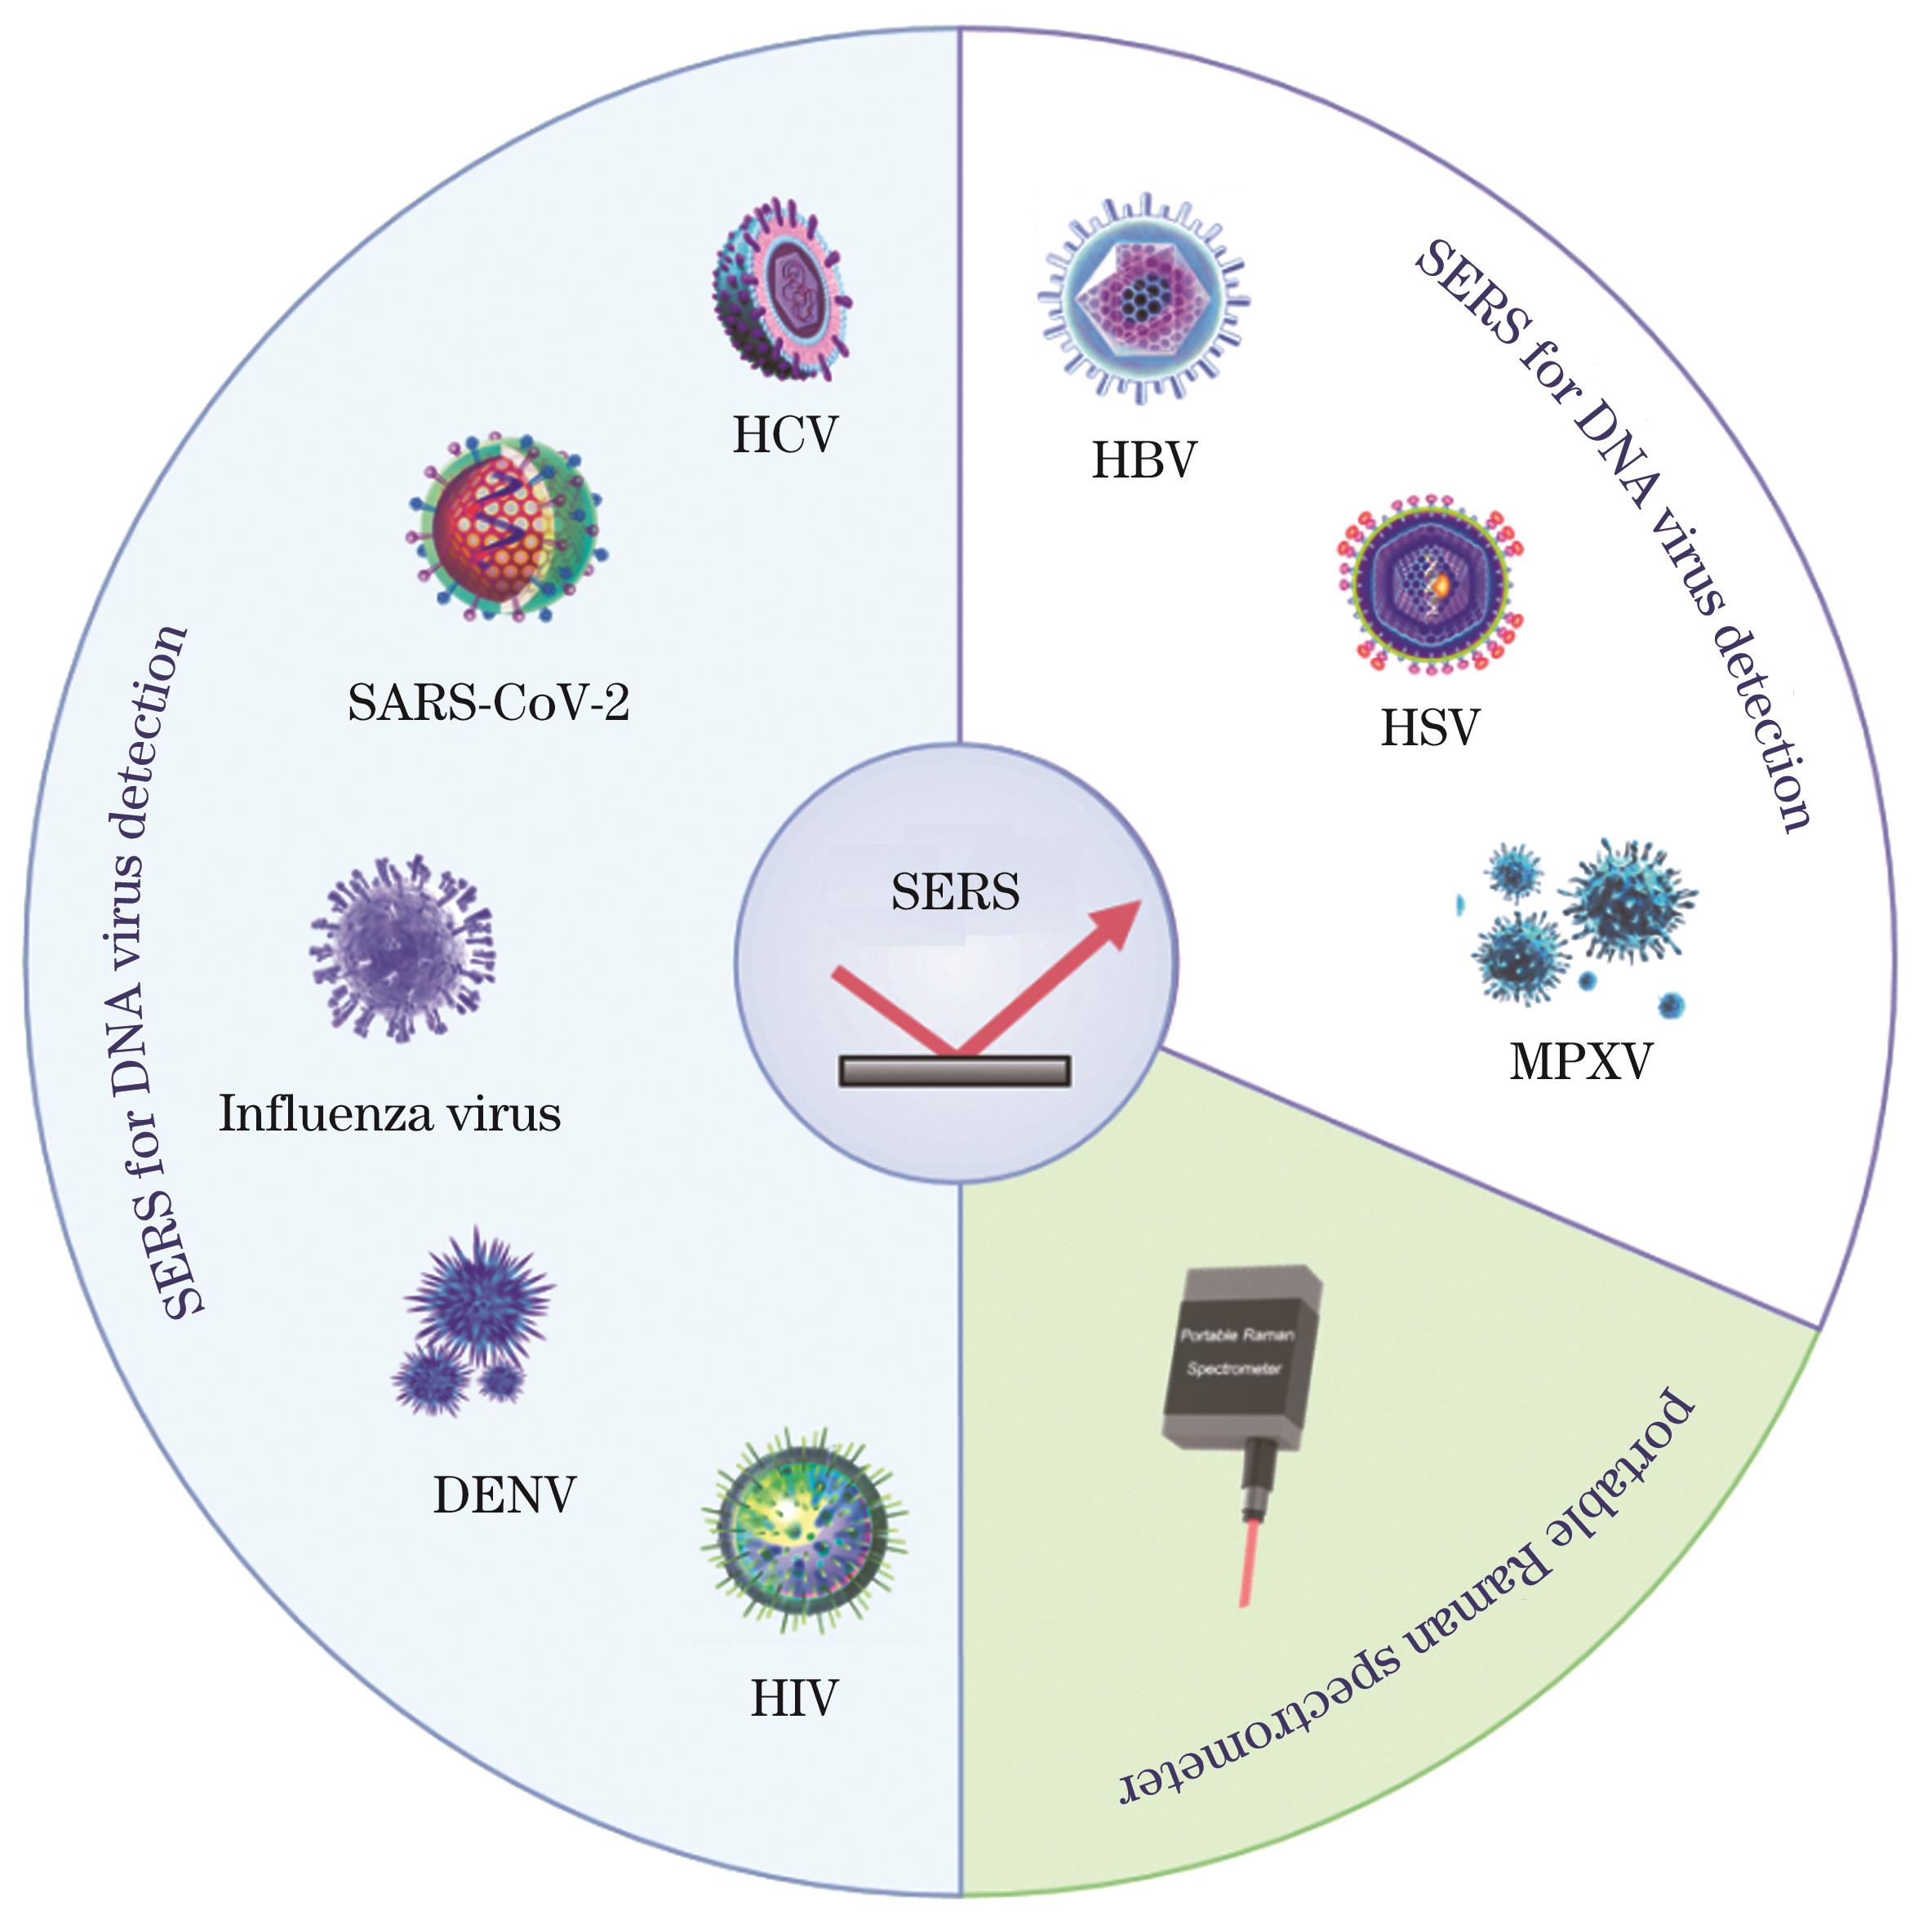 Schematic diagram of virus detection based on SERS technology